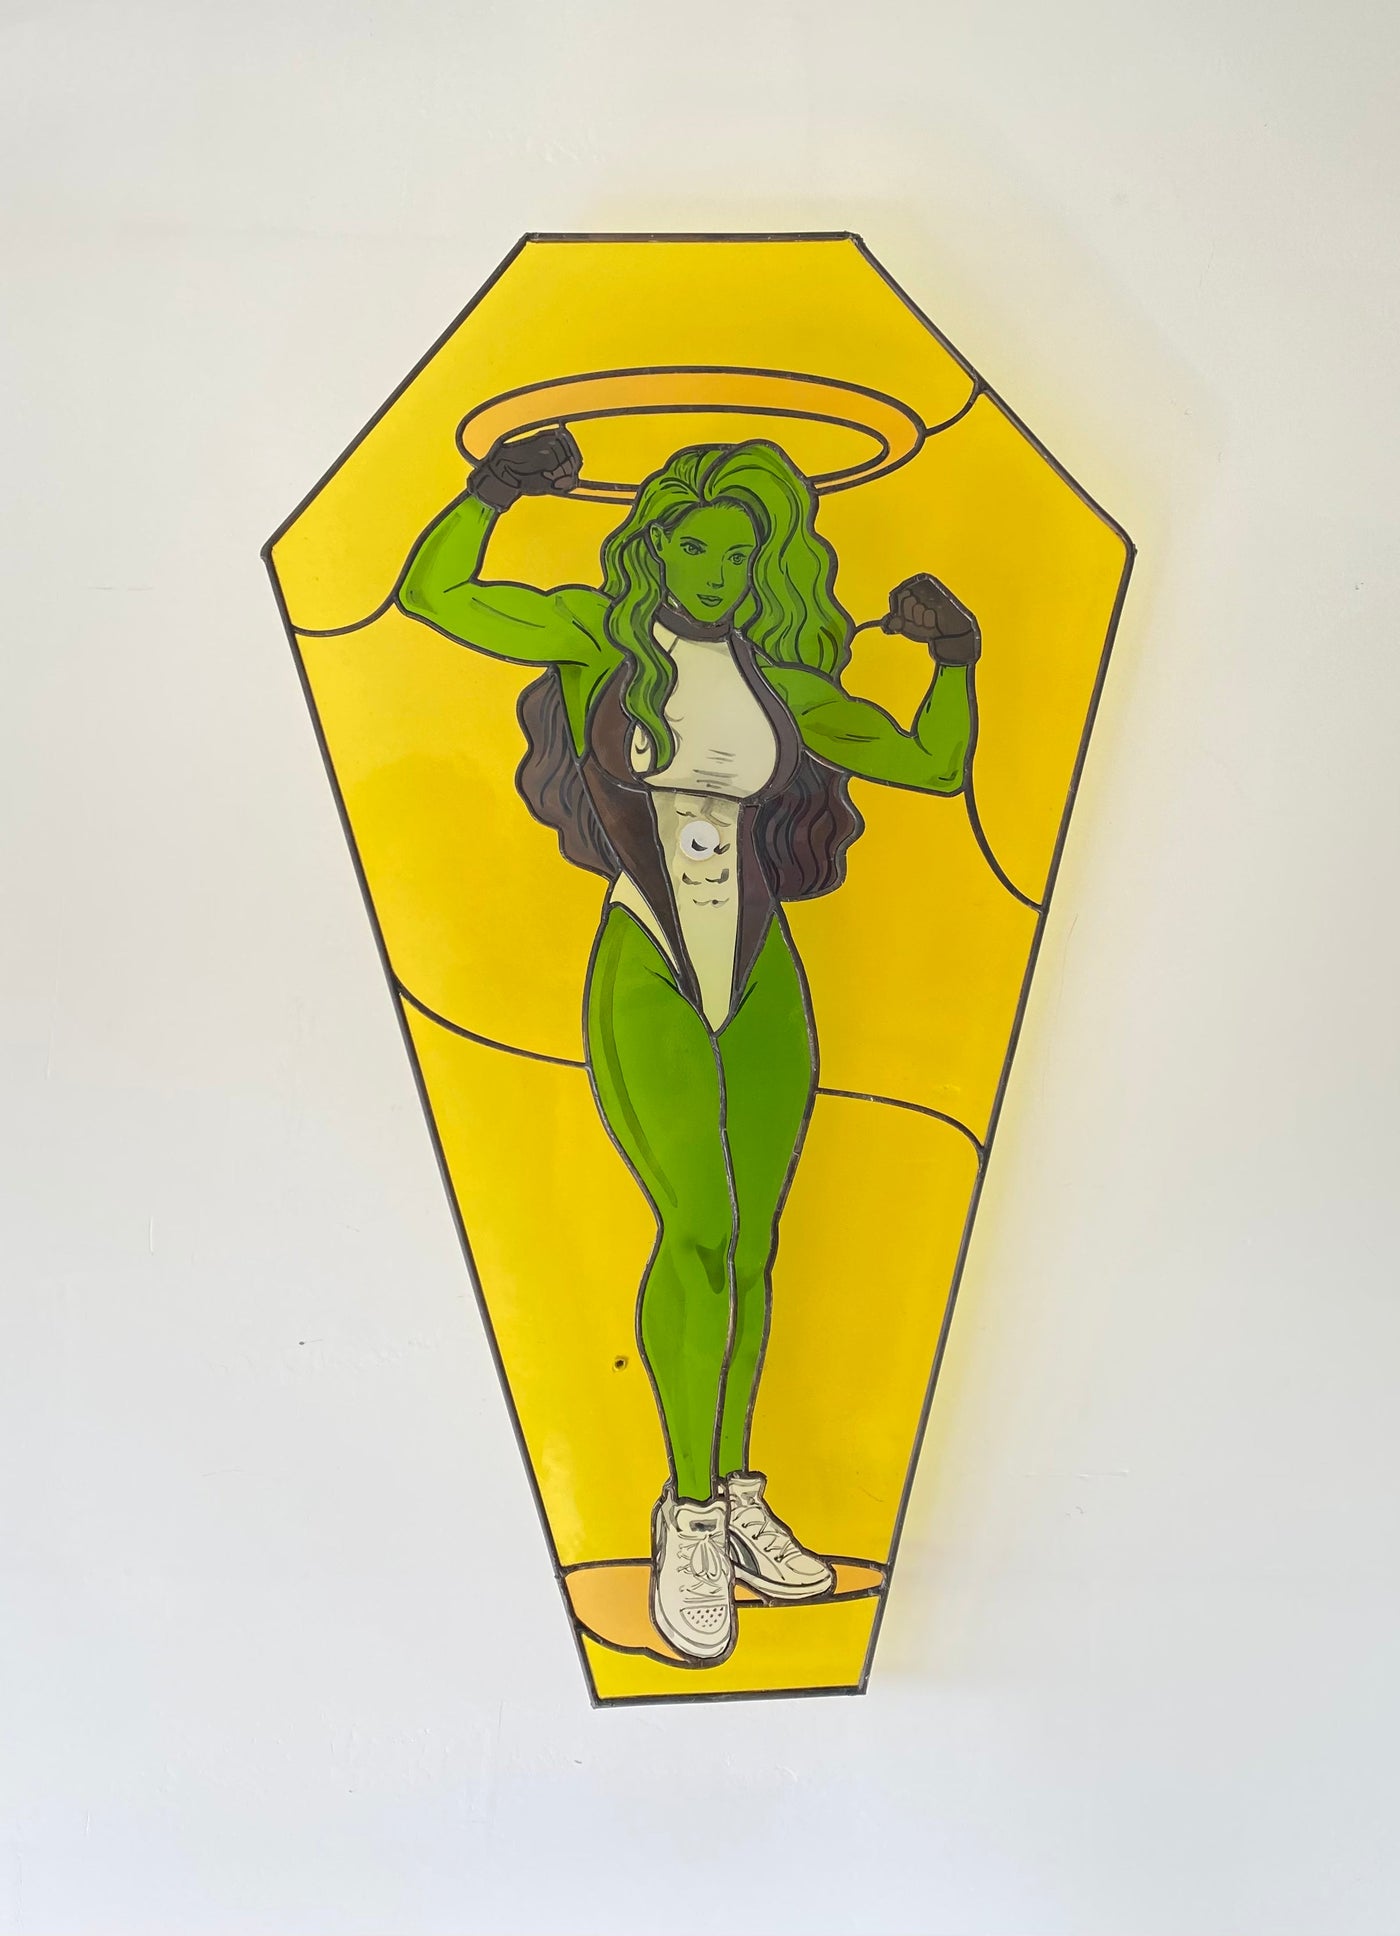 Heroes Never Die - She-Hulk Inspired Stained Glass Art